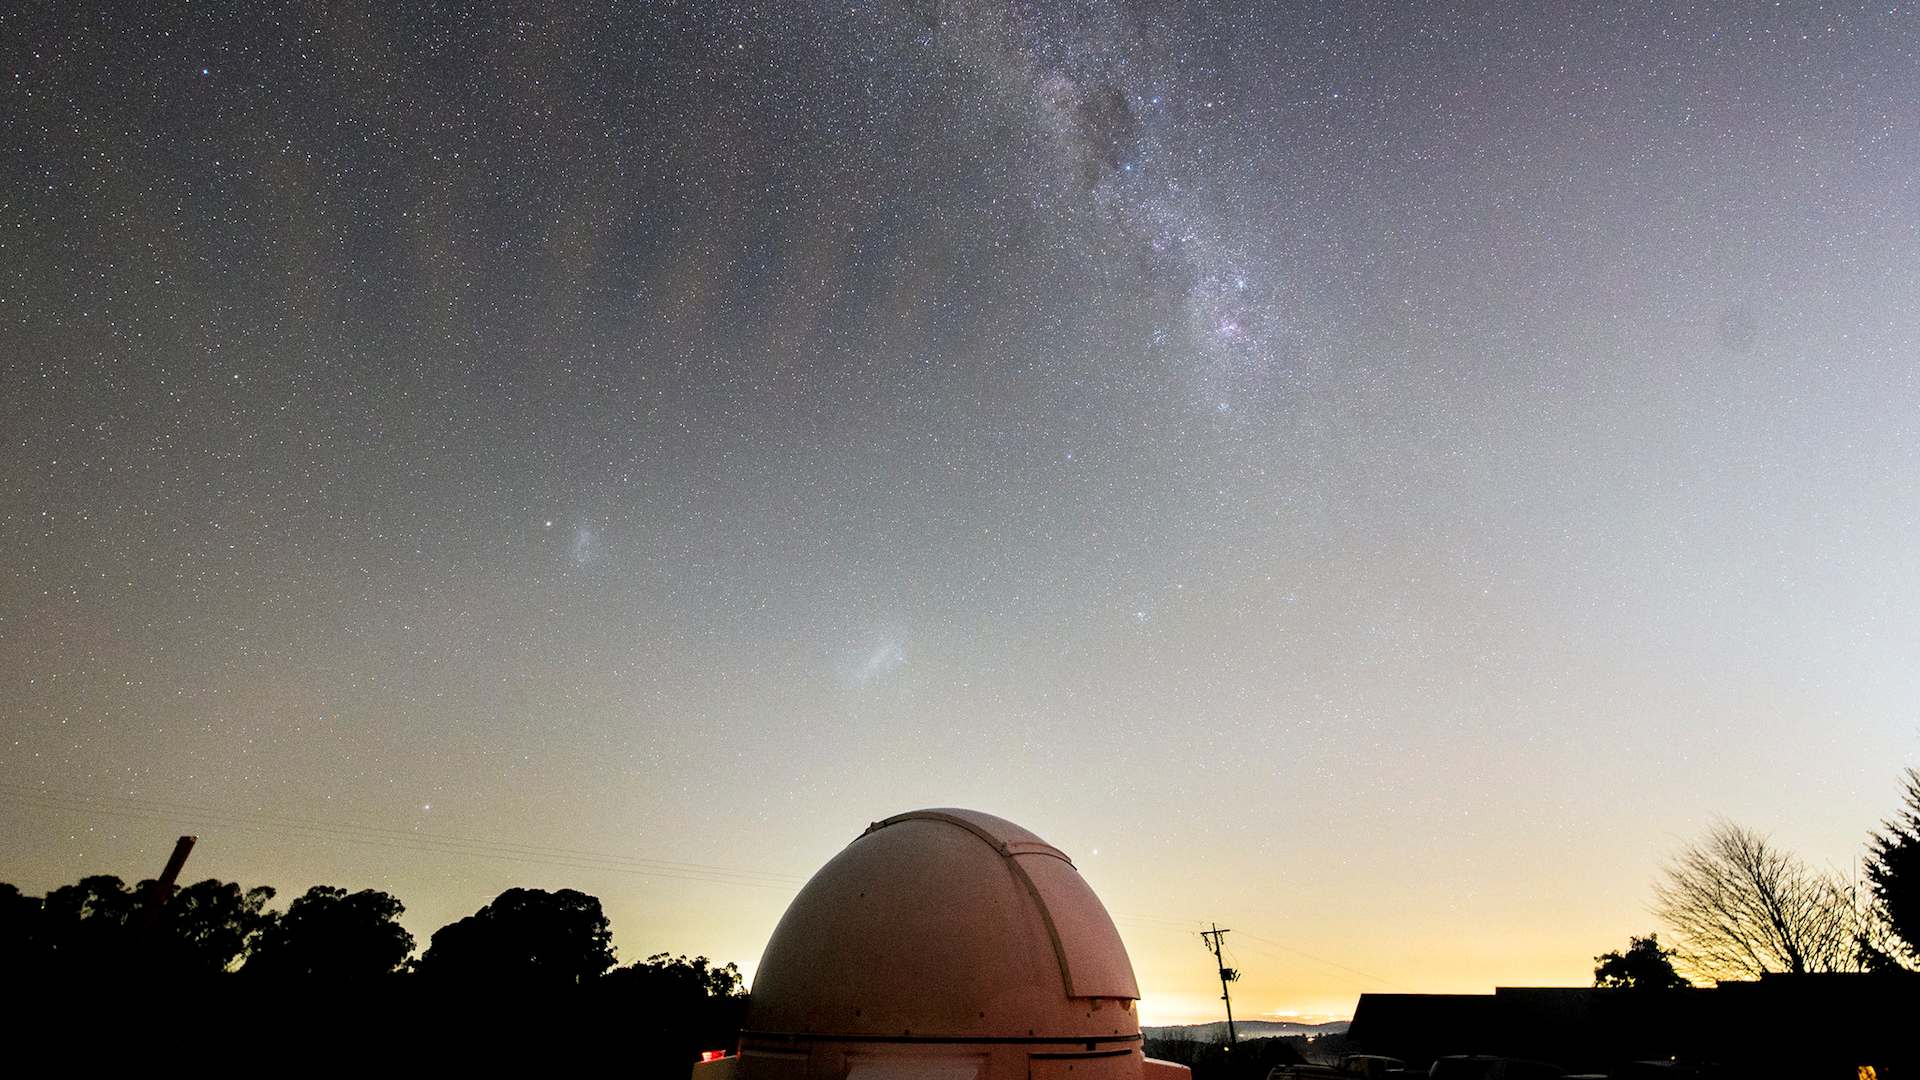 A Night at the Observatory